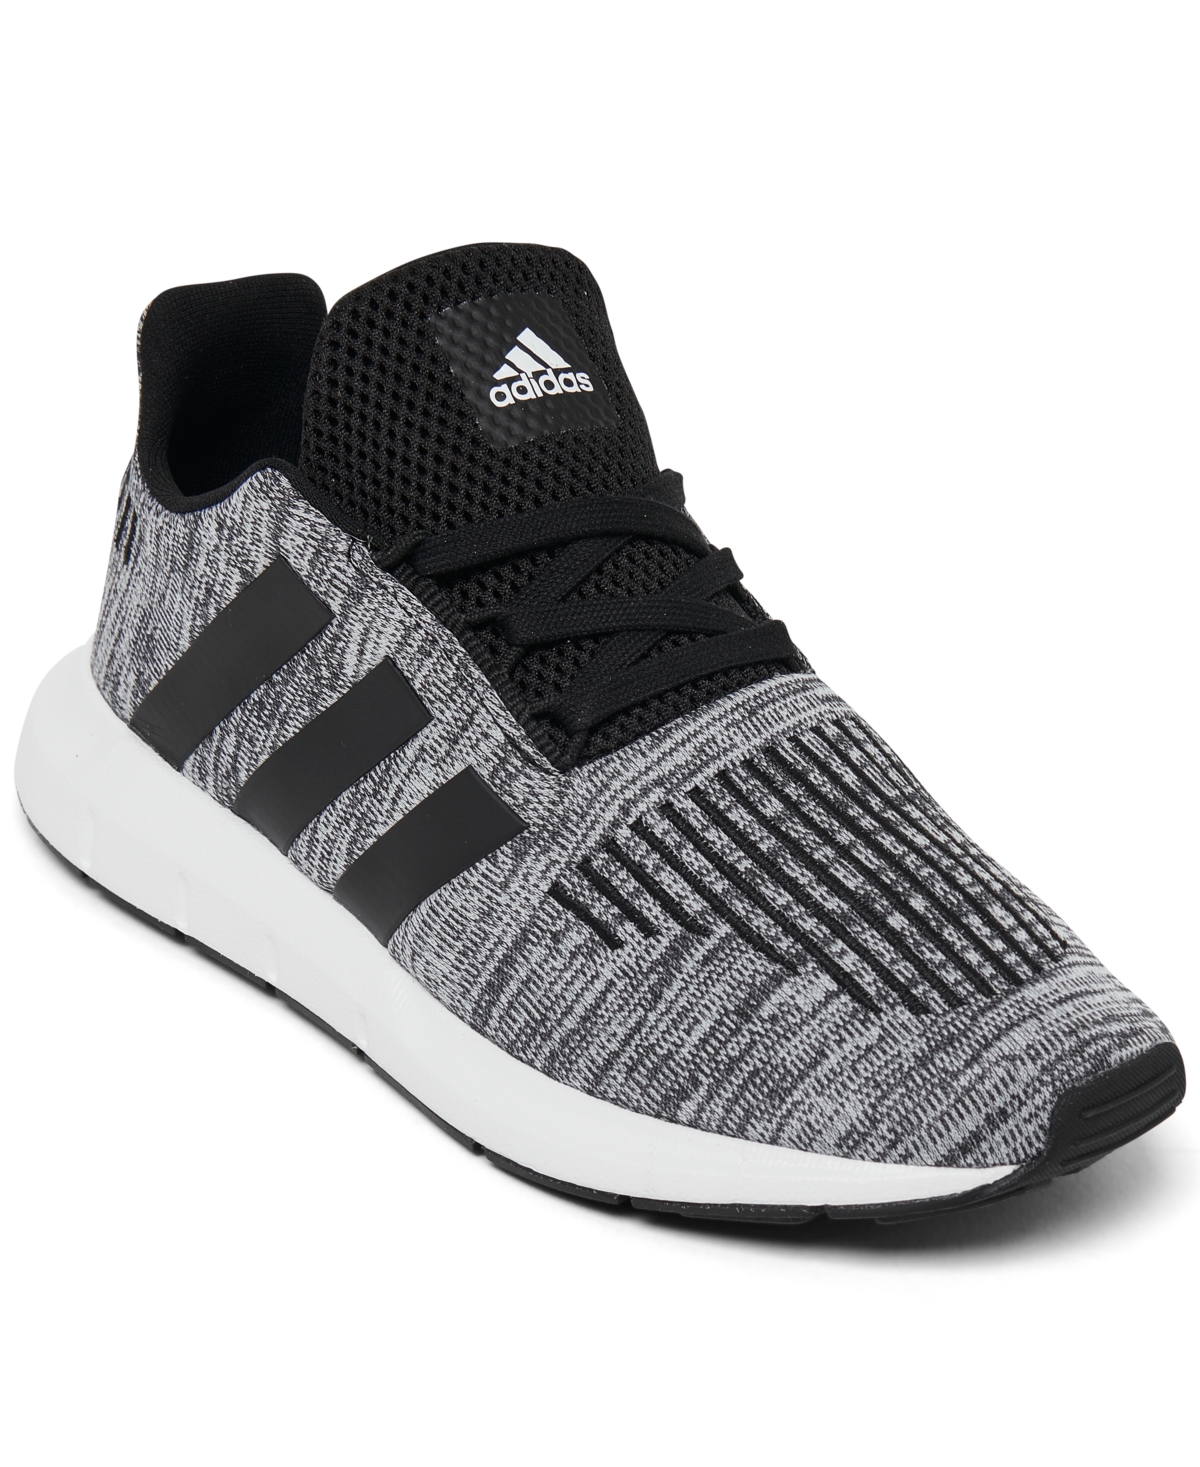 ADIDAS ORIGINALS LITTLE KIDS SWIFT RUN 1.0 CASUAL SNEAKERS FROM FINISH LINE